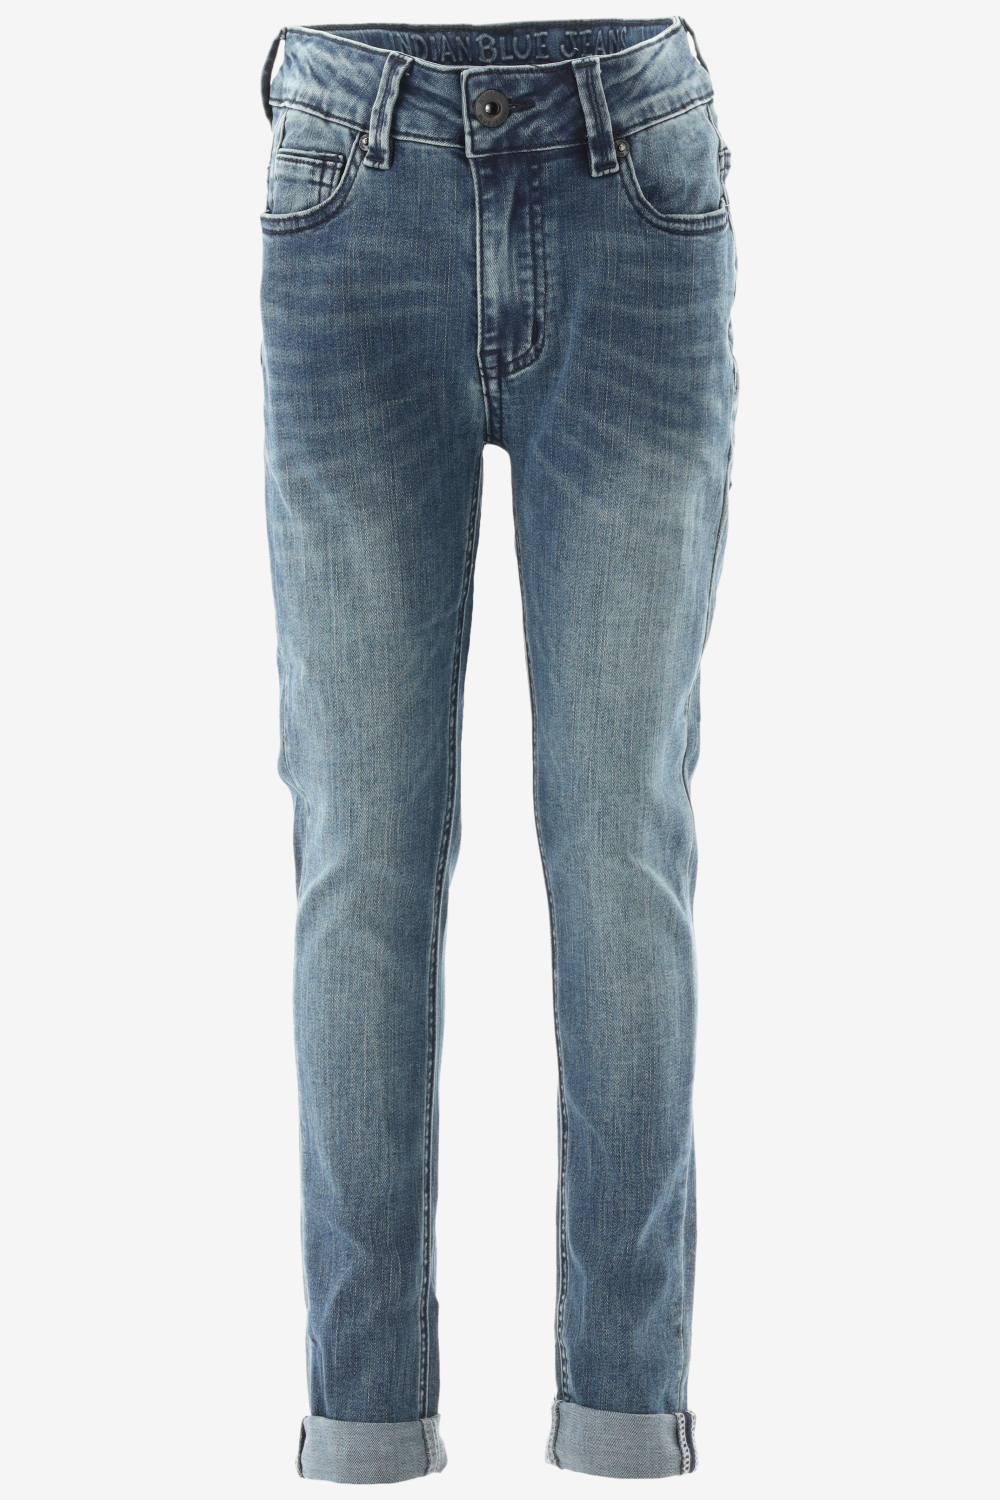 Indian Blue Jeans Blue Jay Tapered Fit Jeans - Blauw